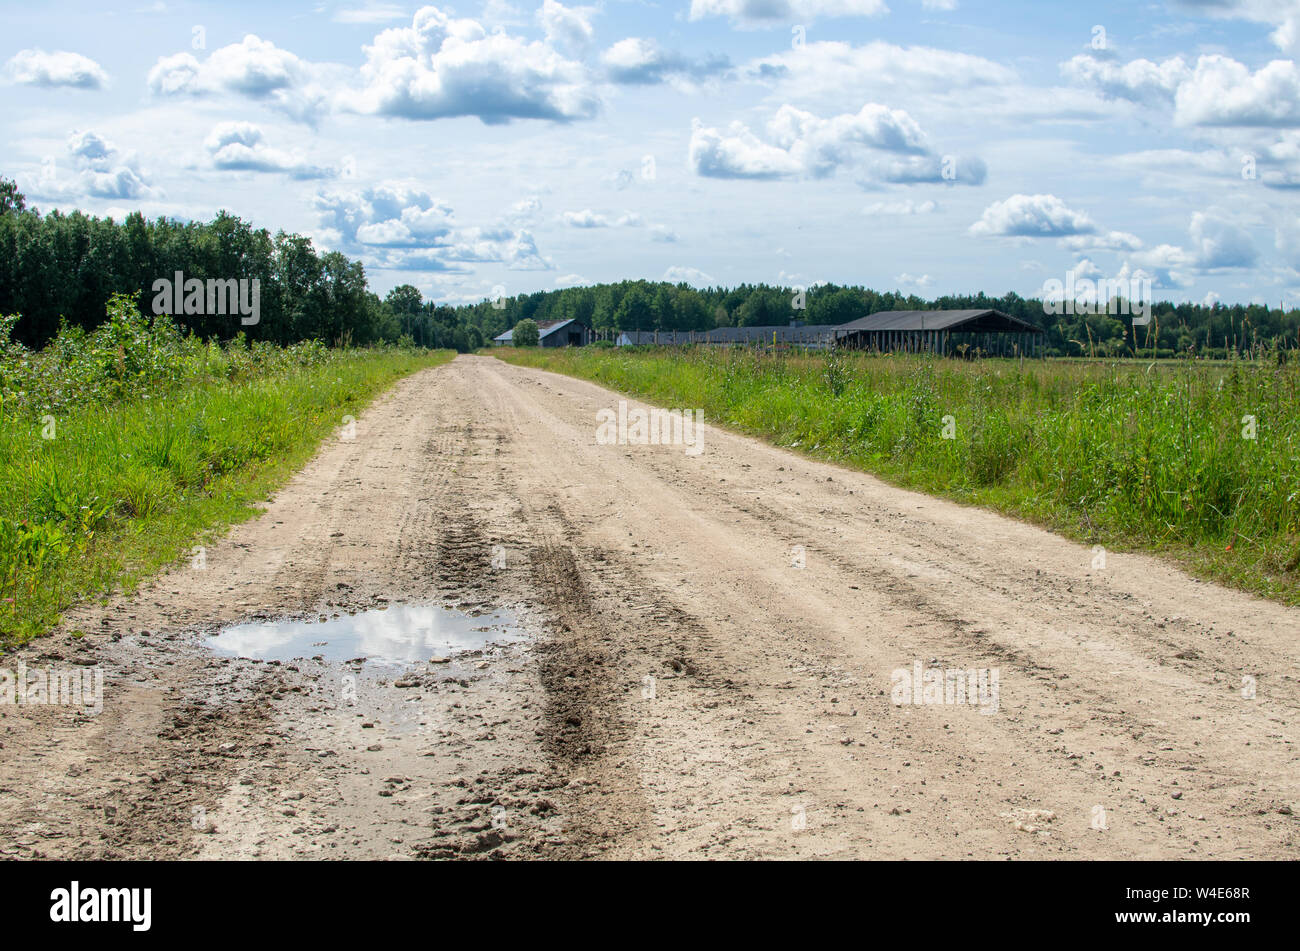 A muddy road in a rural countryside landscape in summer. Stock Photo